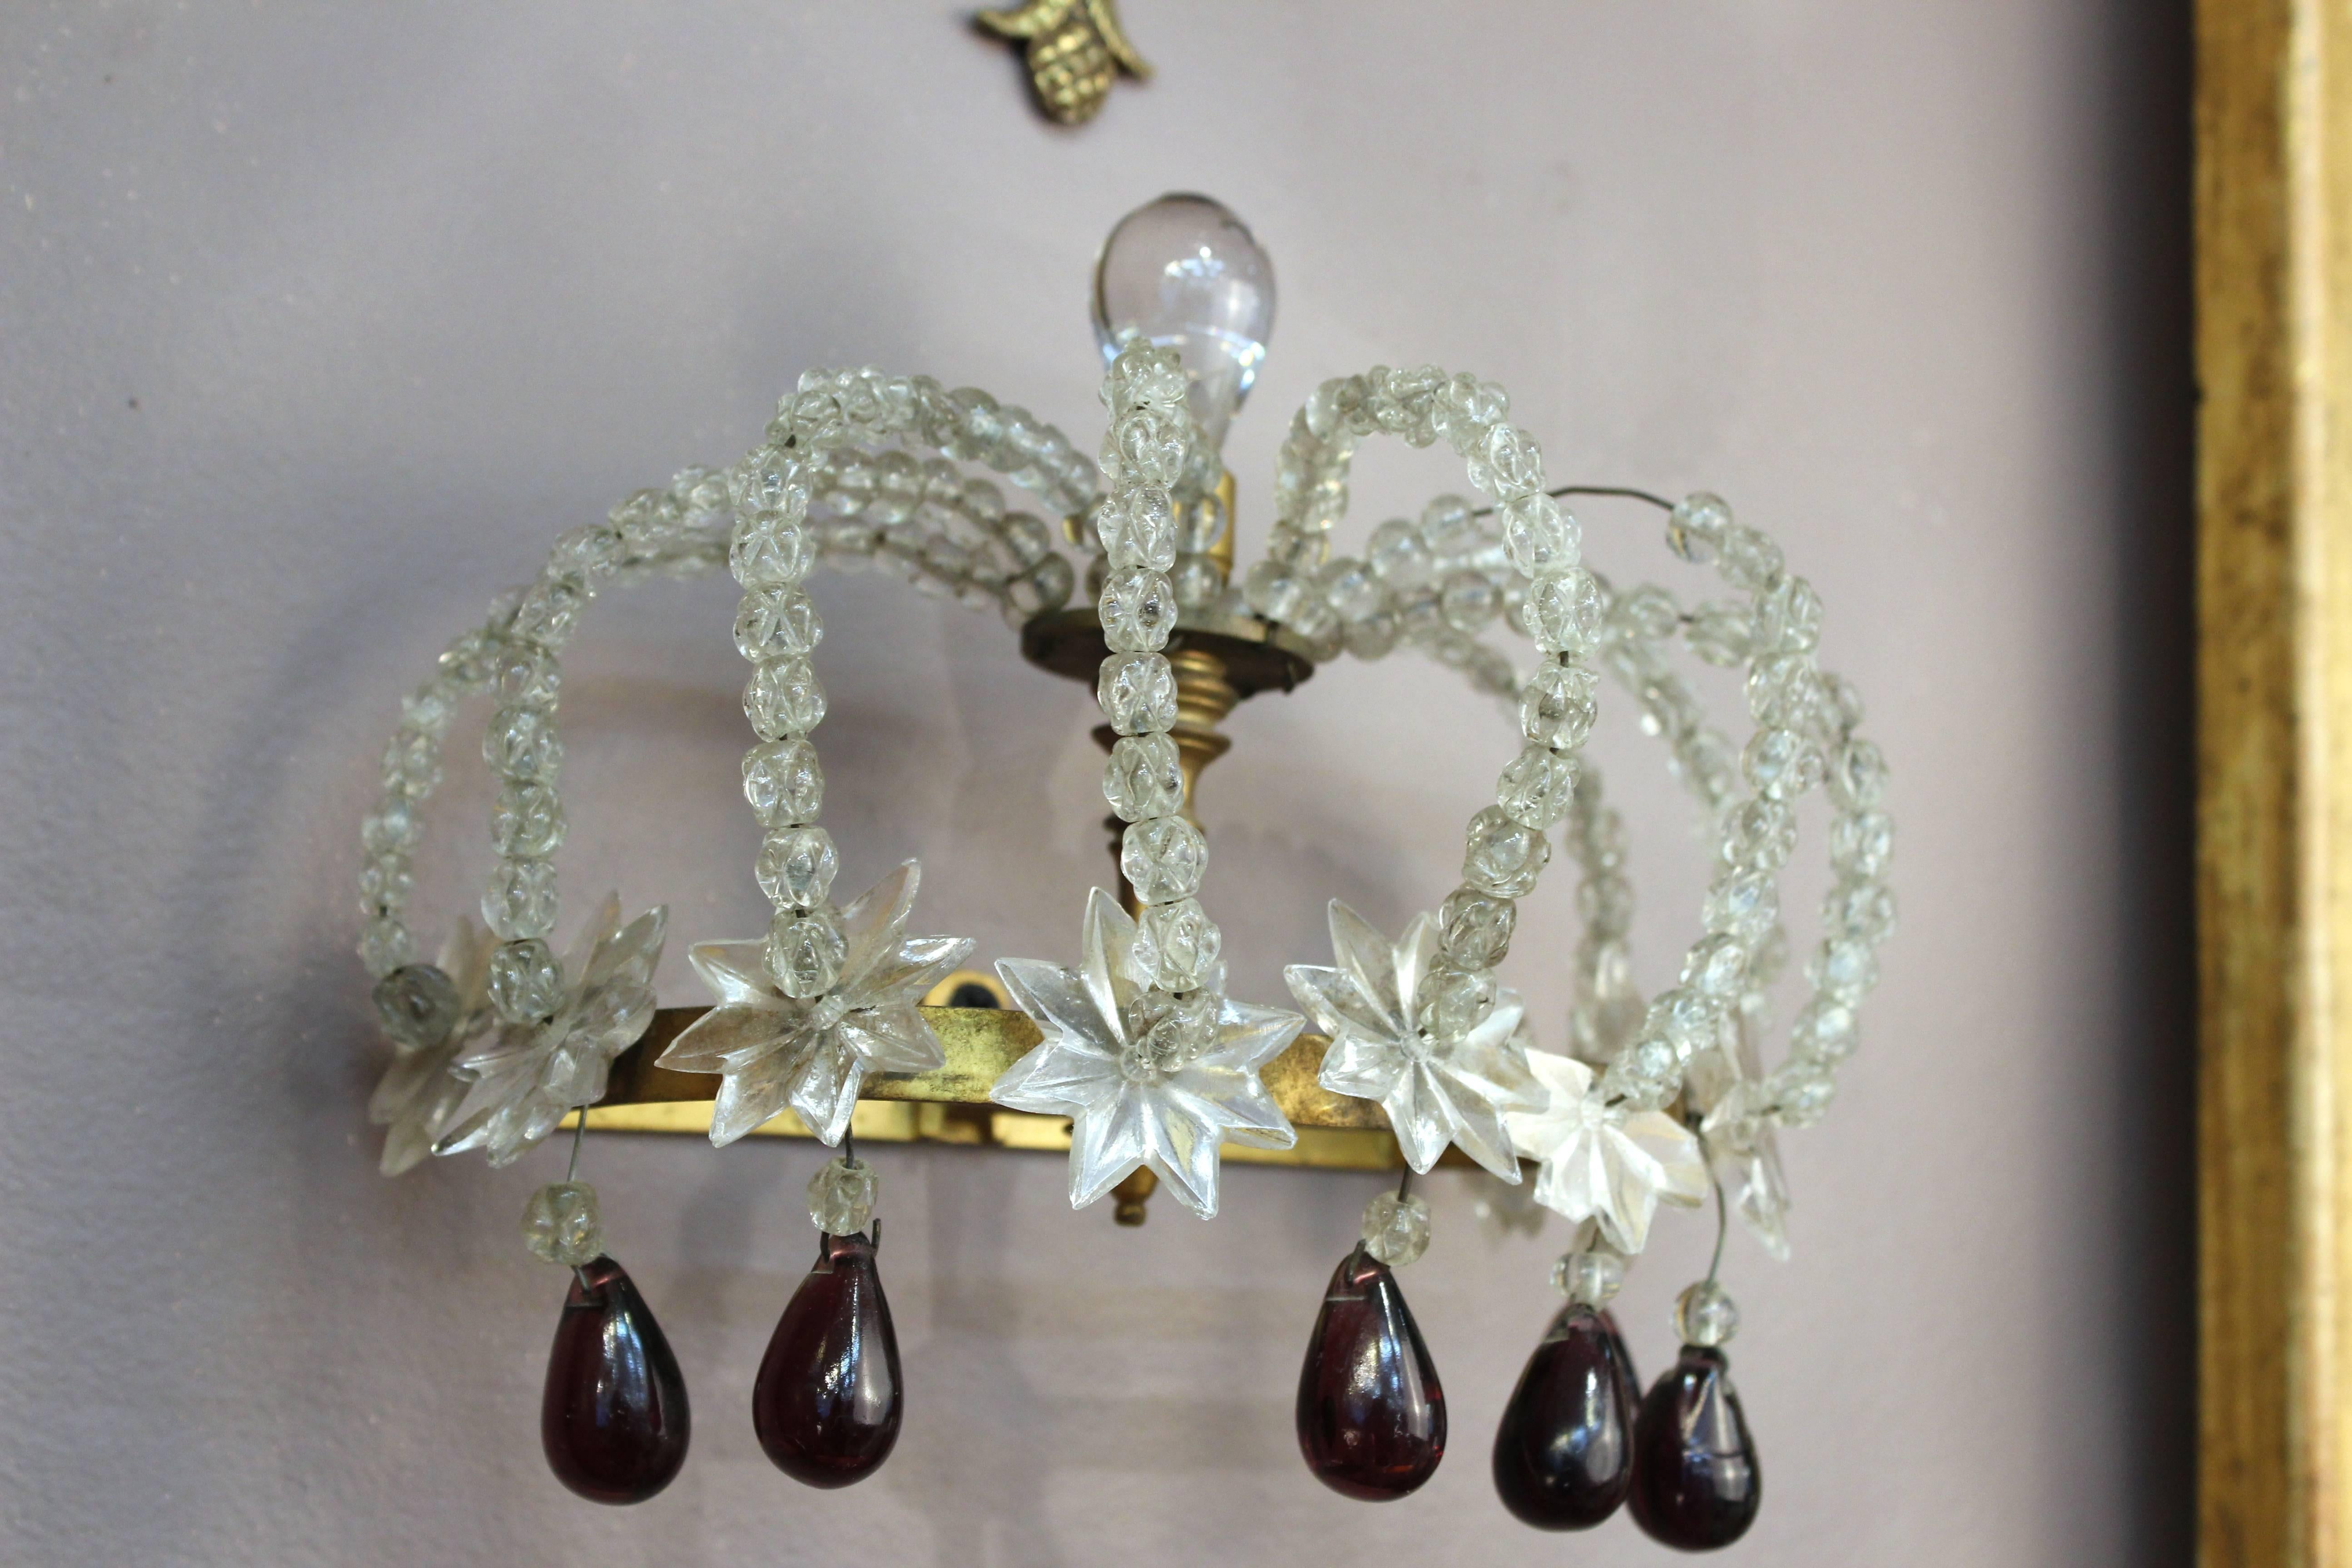 A pair of sconces in the shape of crowns. Crafted in clear rock crystal beads on brass base with stars on the band and dangling plum colored drops. Purely decorative, the pieces do not hold candles or include lights. Despite a missing drop on one